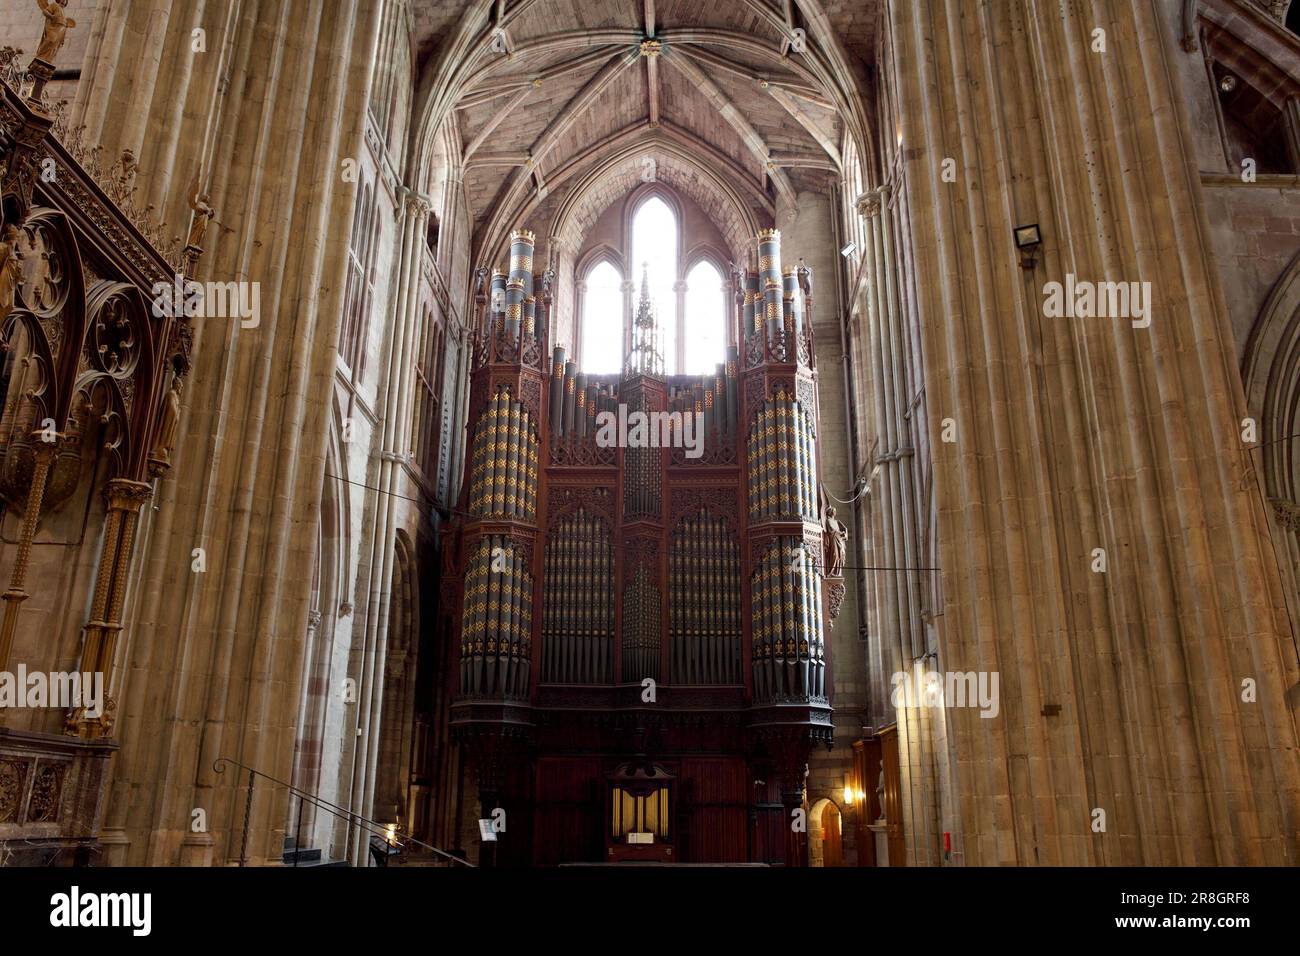 The imposing Worcester Cathedral Organ, viewed here in landscape format. Stock Photo